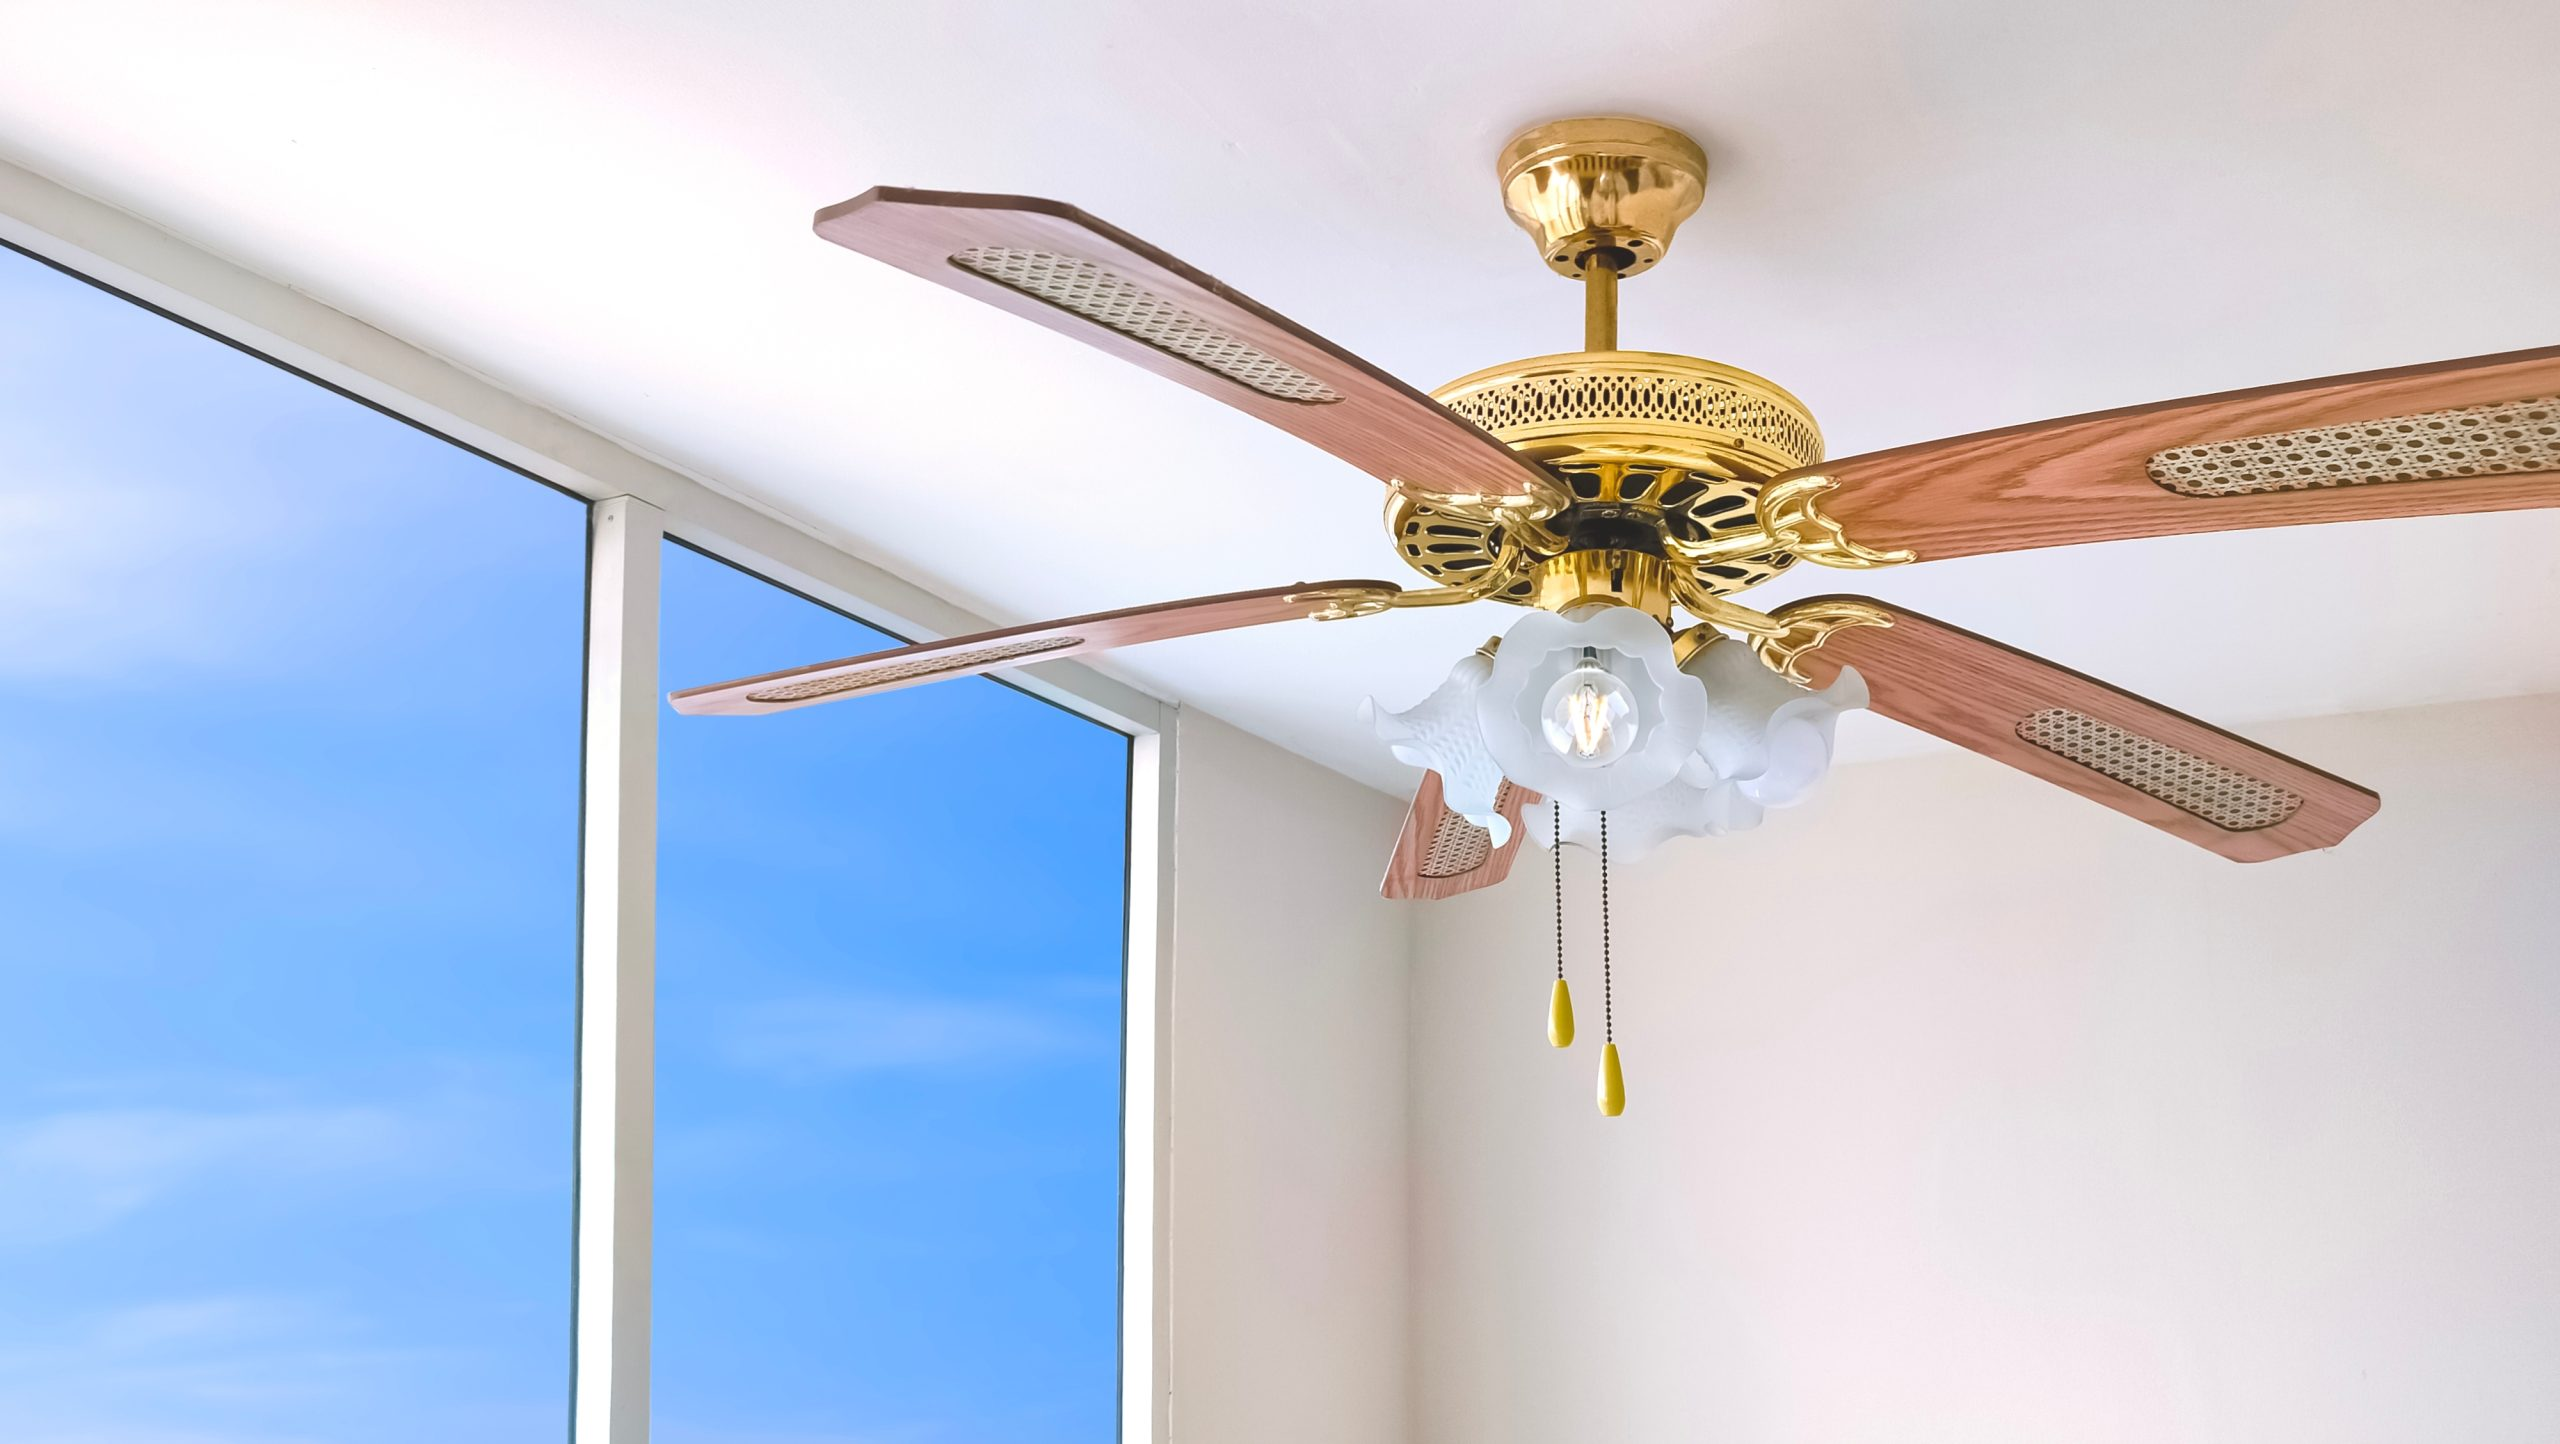 Types of fans to enjoy a cool breeze at home